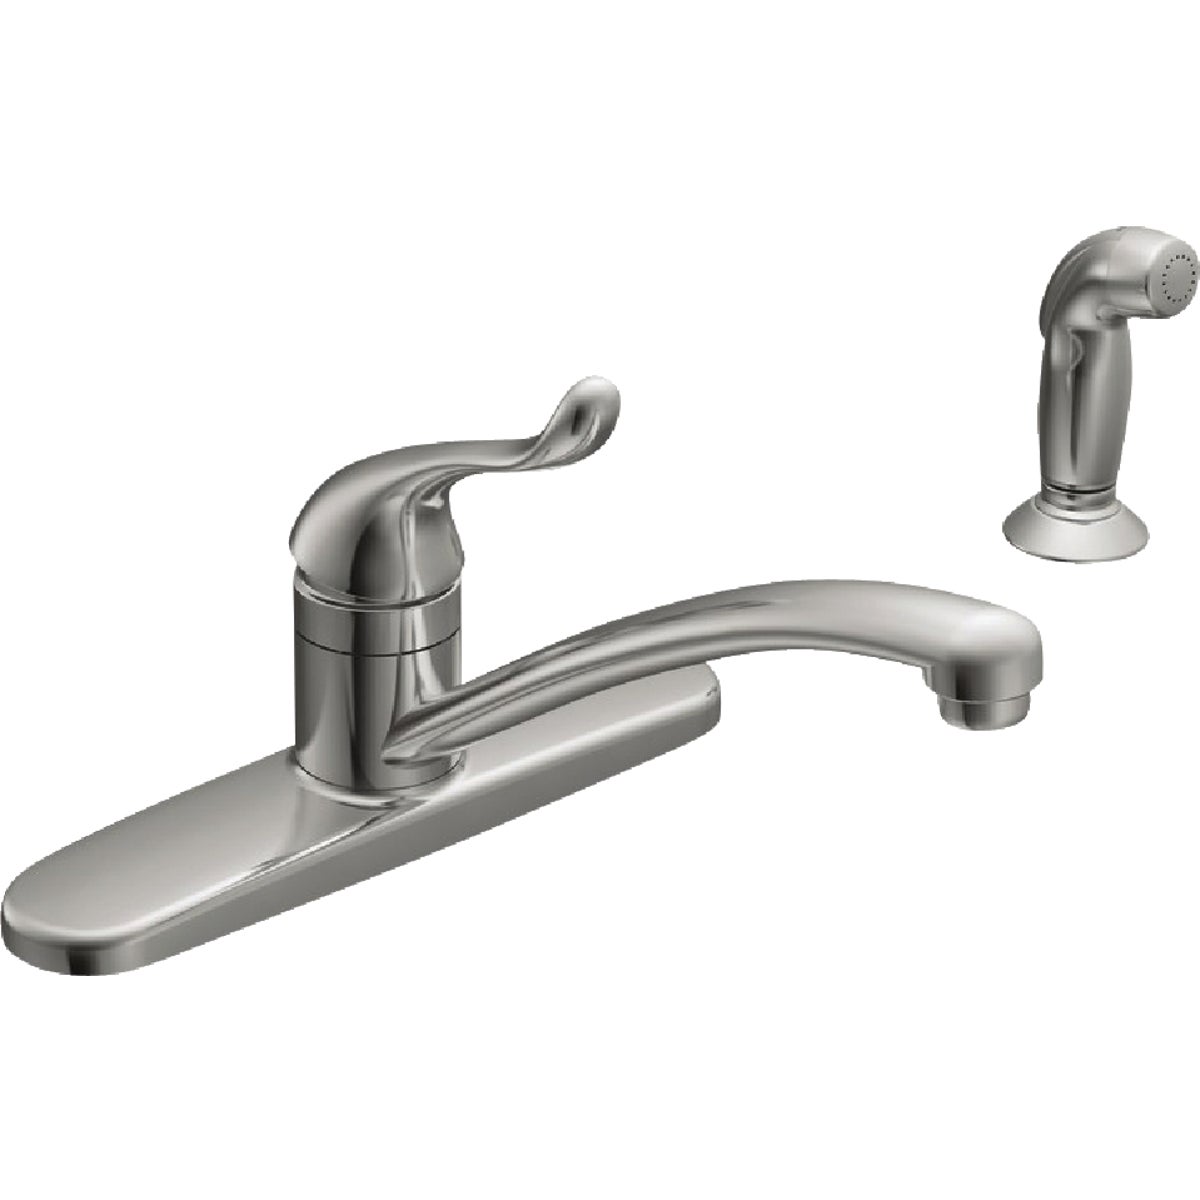 Item 458098, Single lever handle kitchen faucet with swing spout and matching Protege 